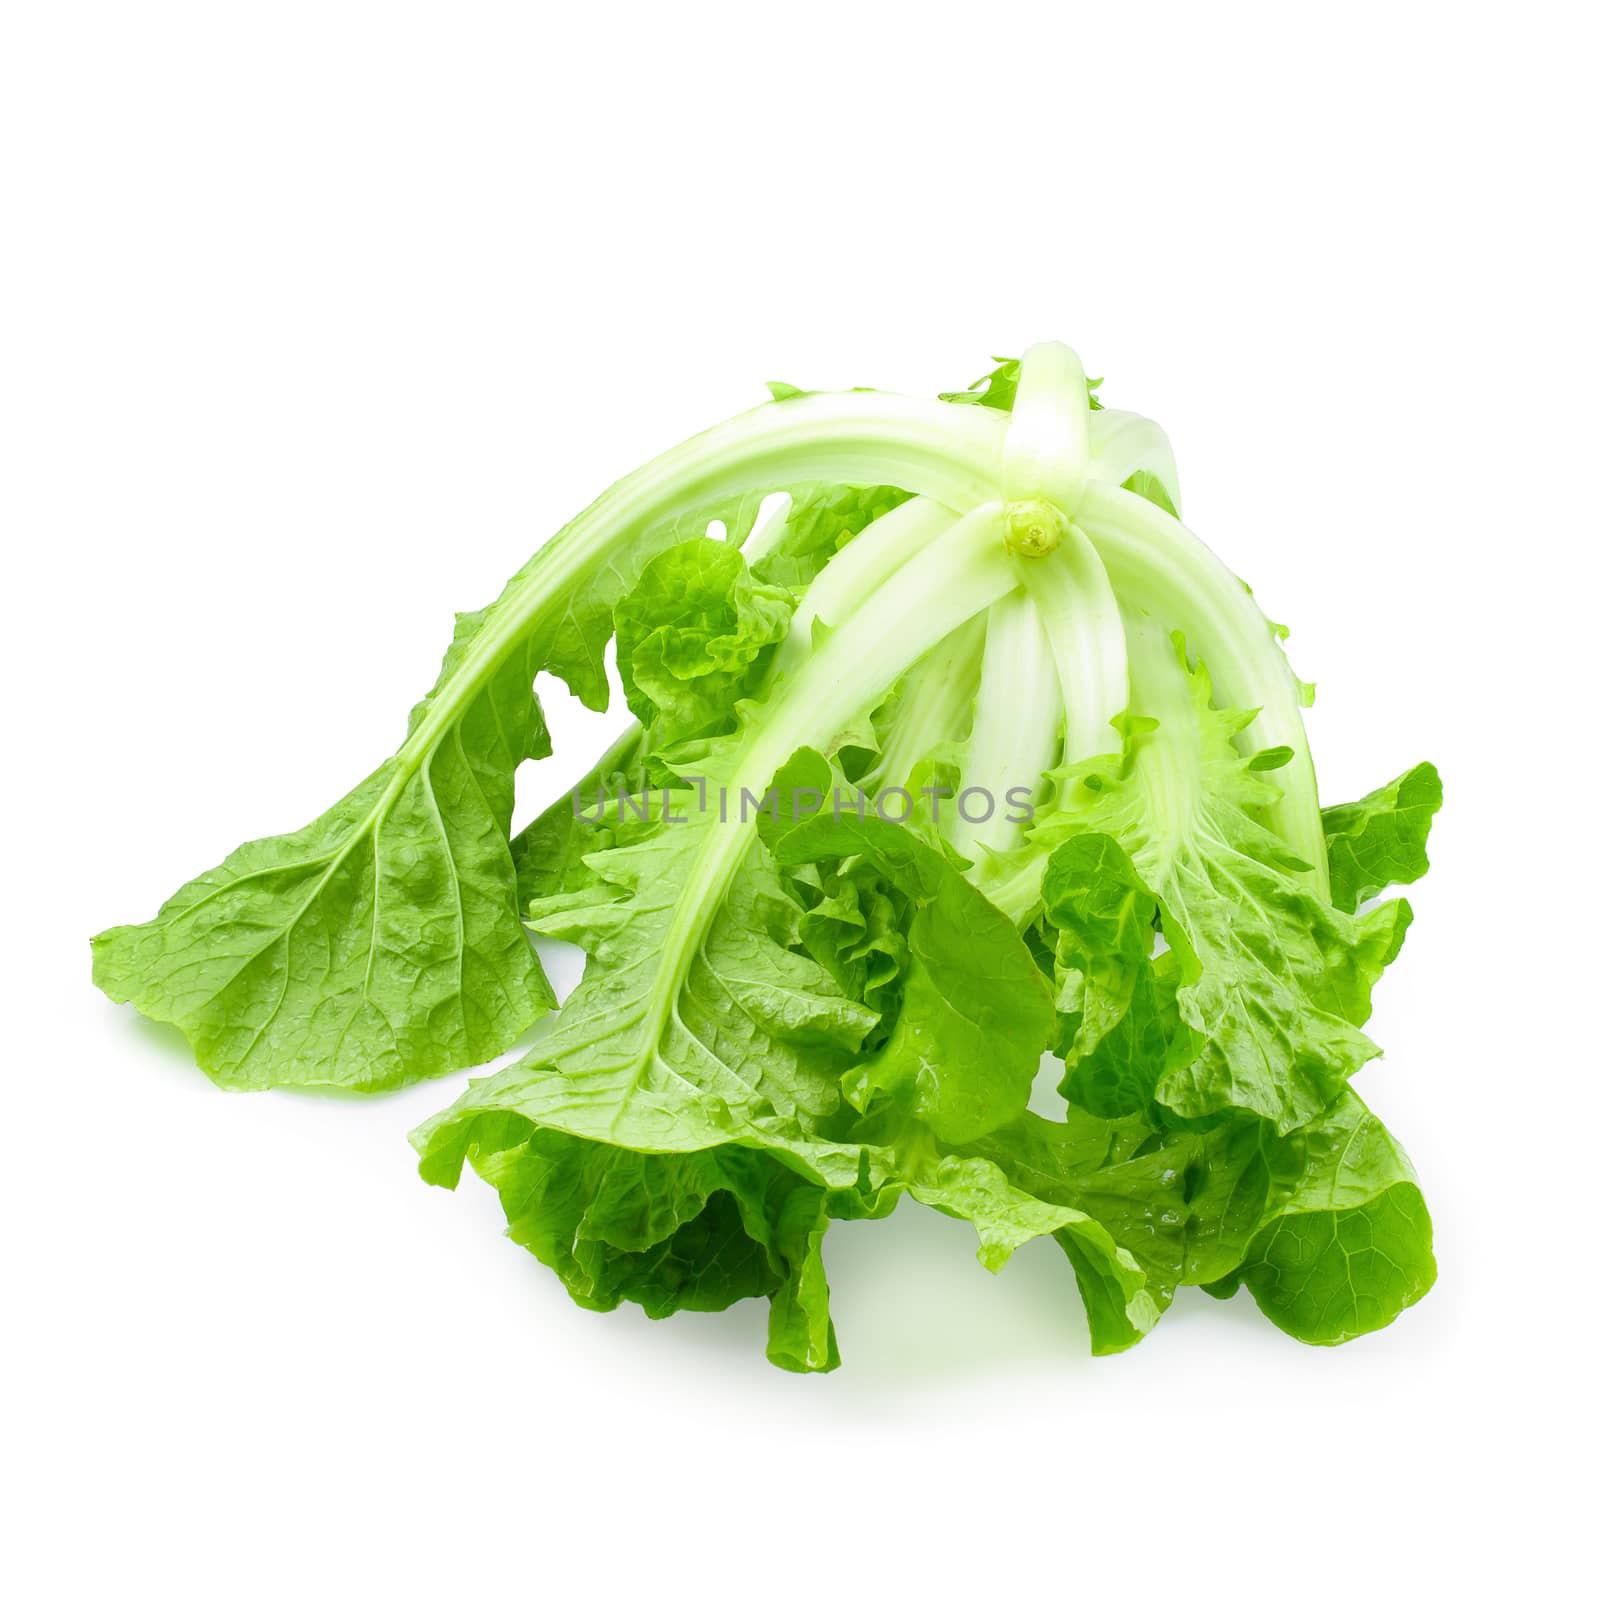 Lettuce leaves isolated on a white background by kaiskynet